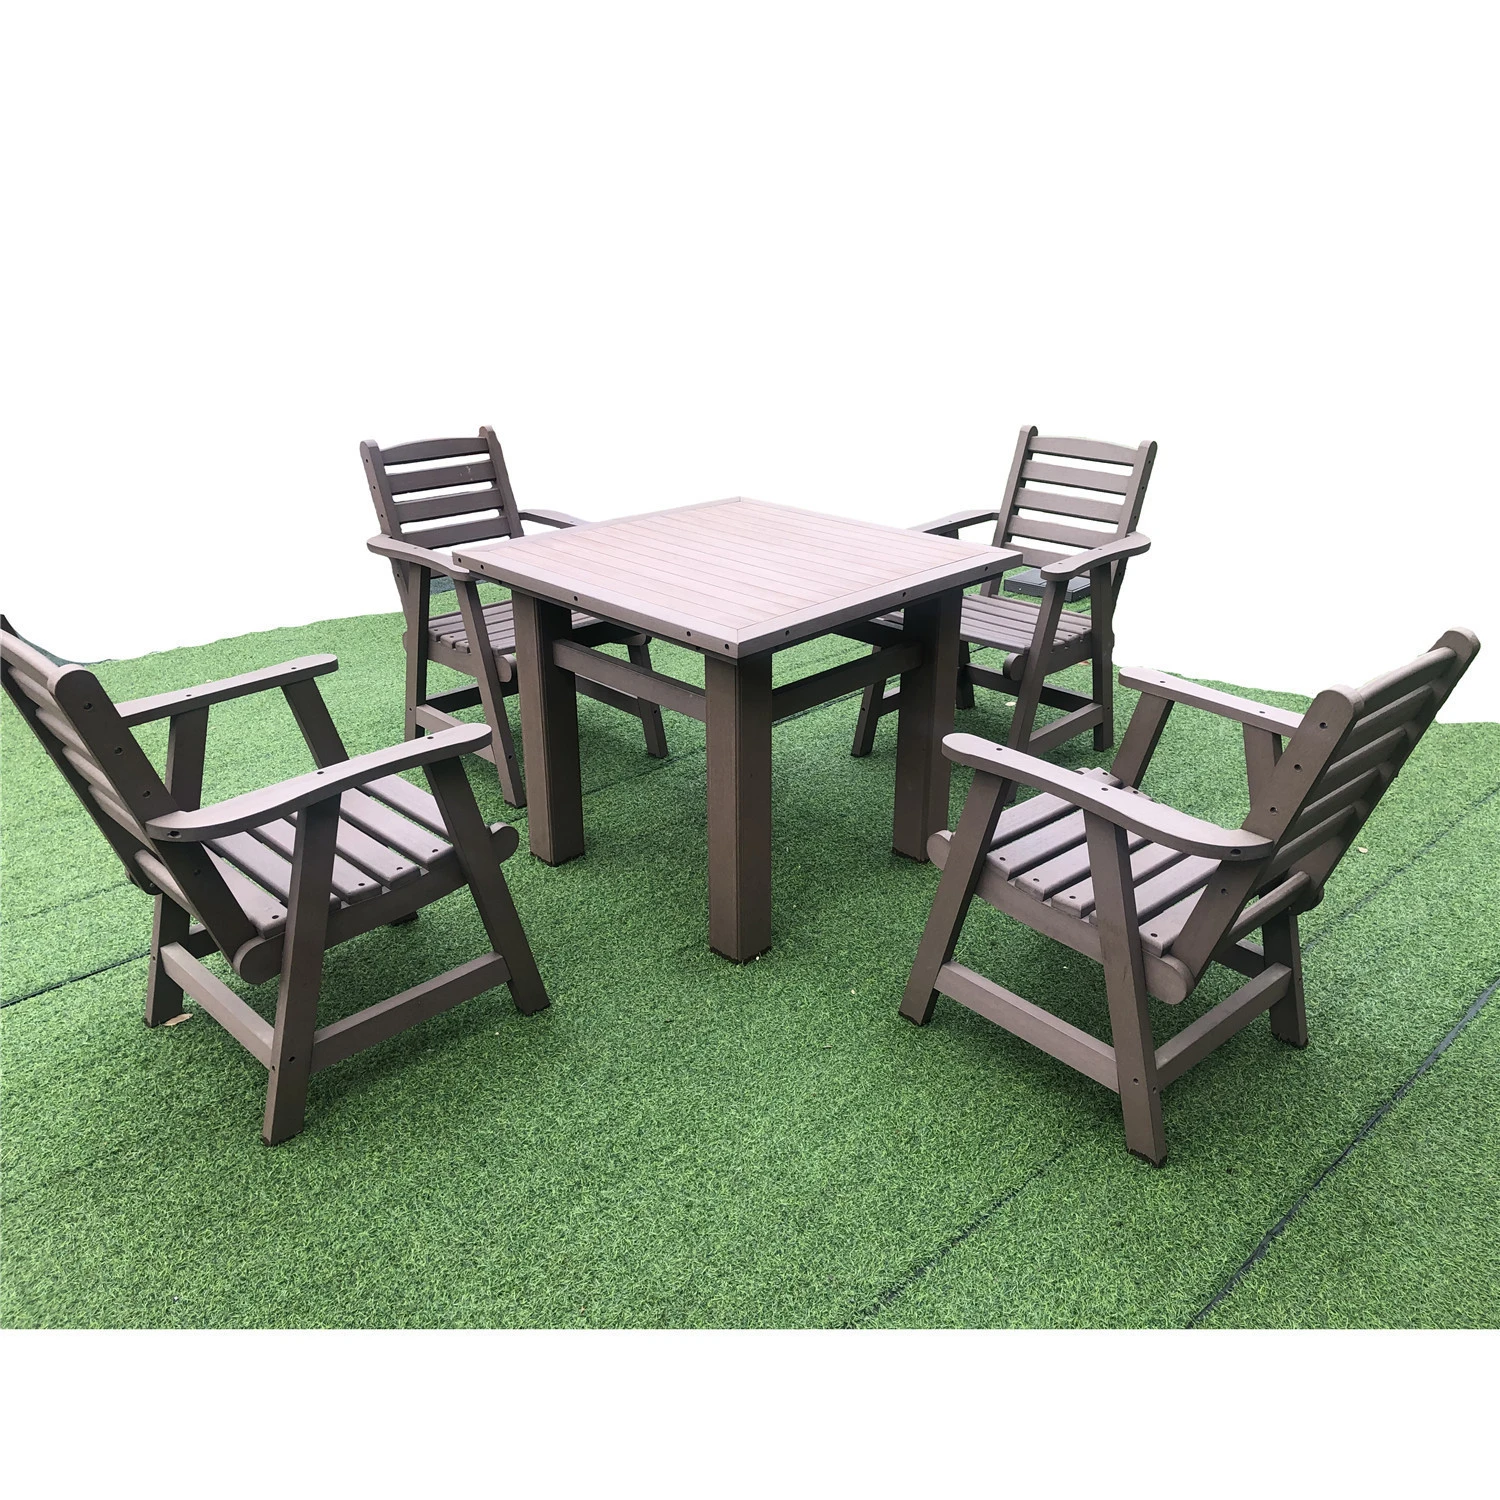 Low Maintenance WPC Garden Outdoor Bench and Table Furniture